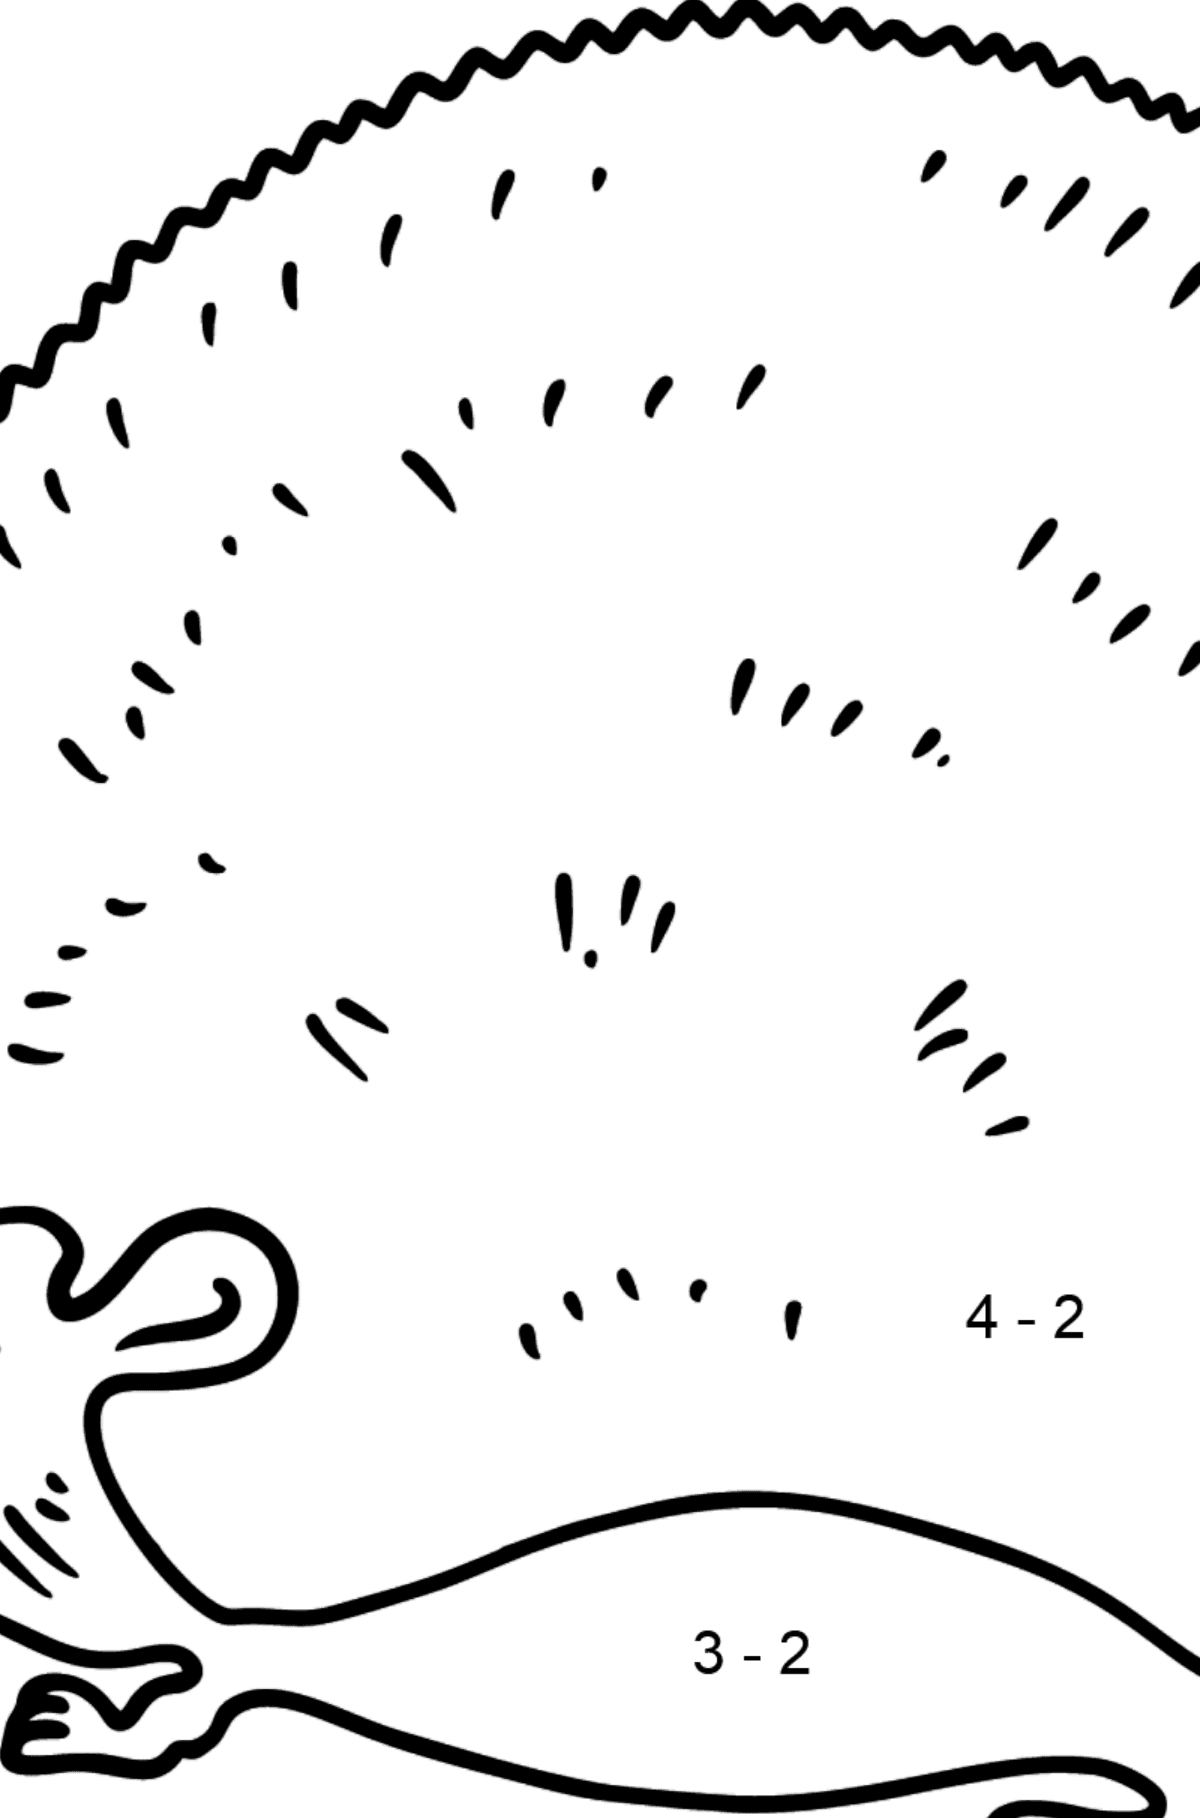 Hedgehog coloring page - Math Coloring - Subtraction for Kids